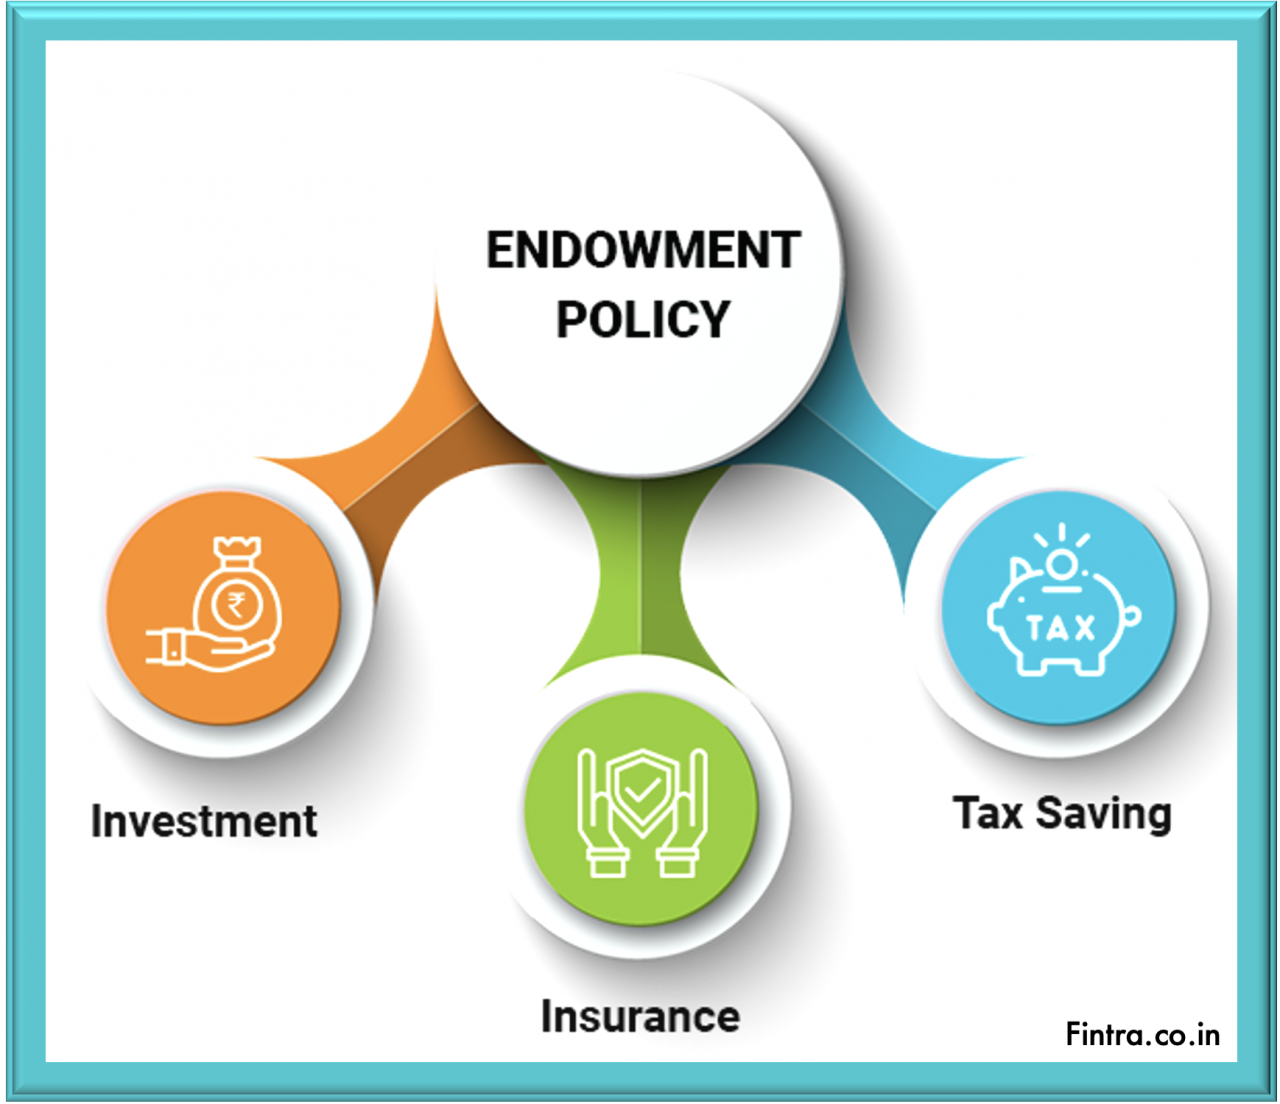 Do you pay tax on an endowment policy